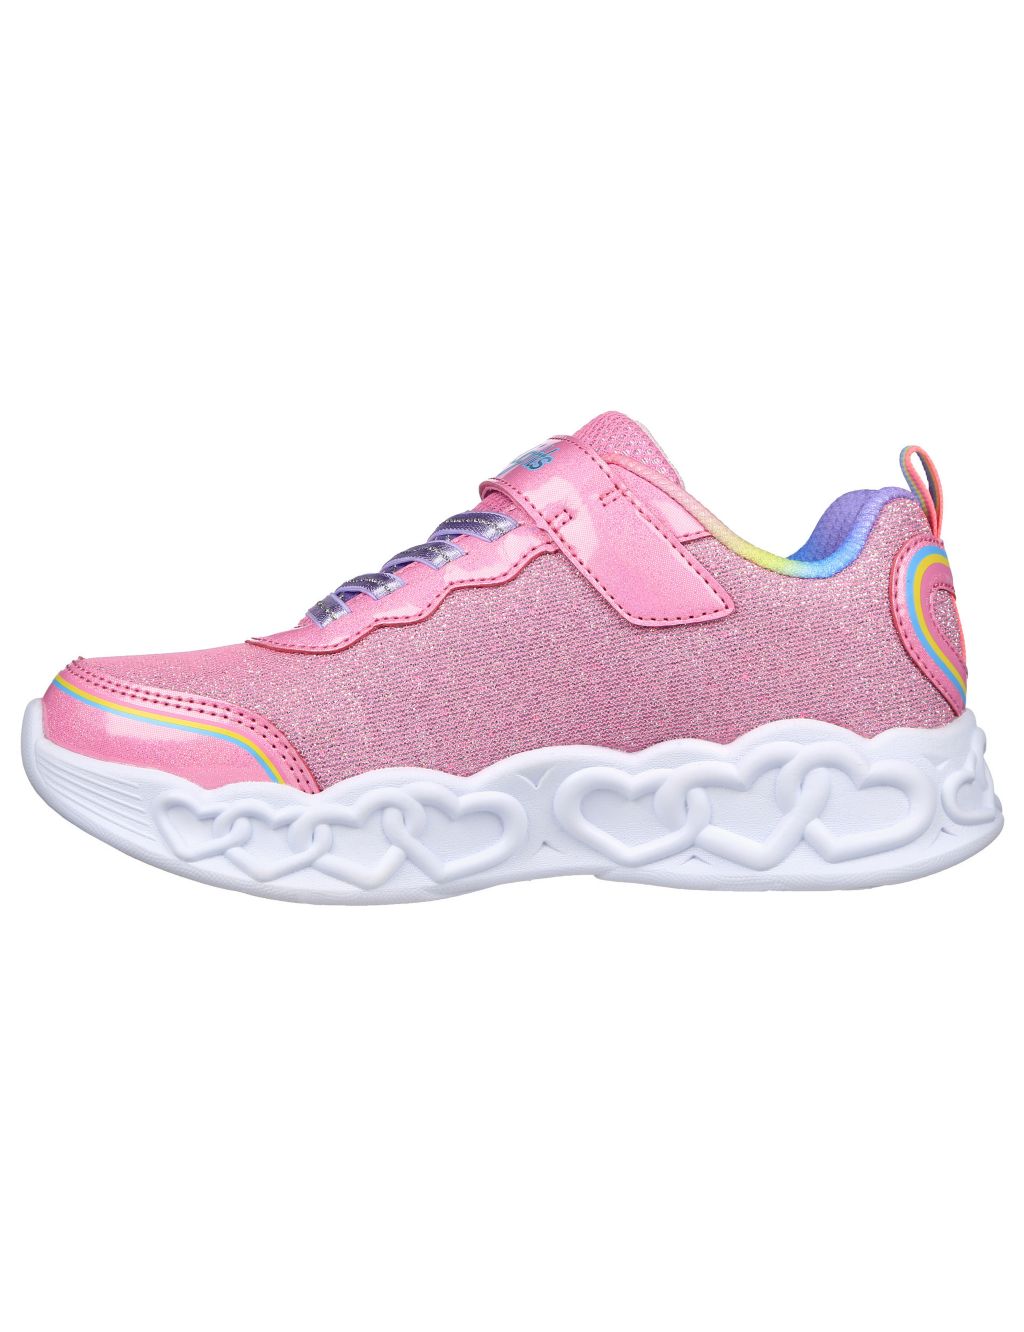 Infinite Heart Lights Love Prism Trainers (9.5 Small - 3 Large) image 5